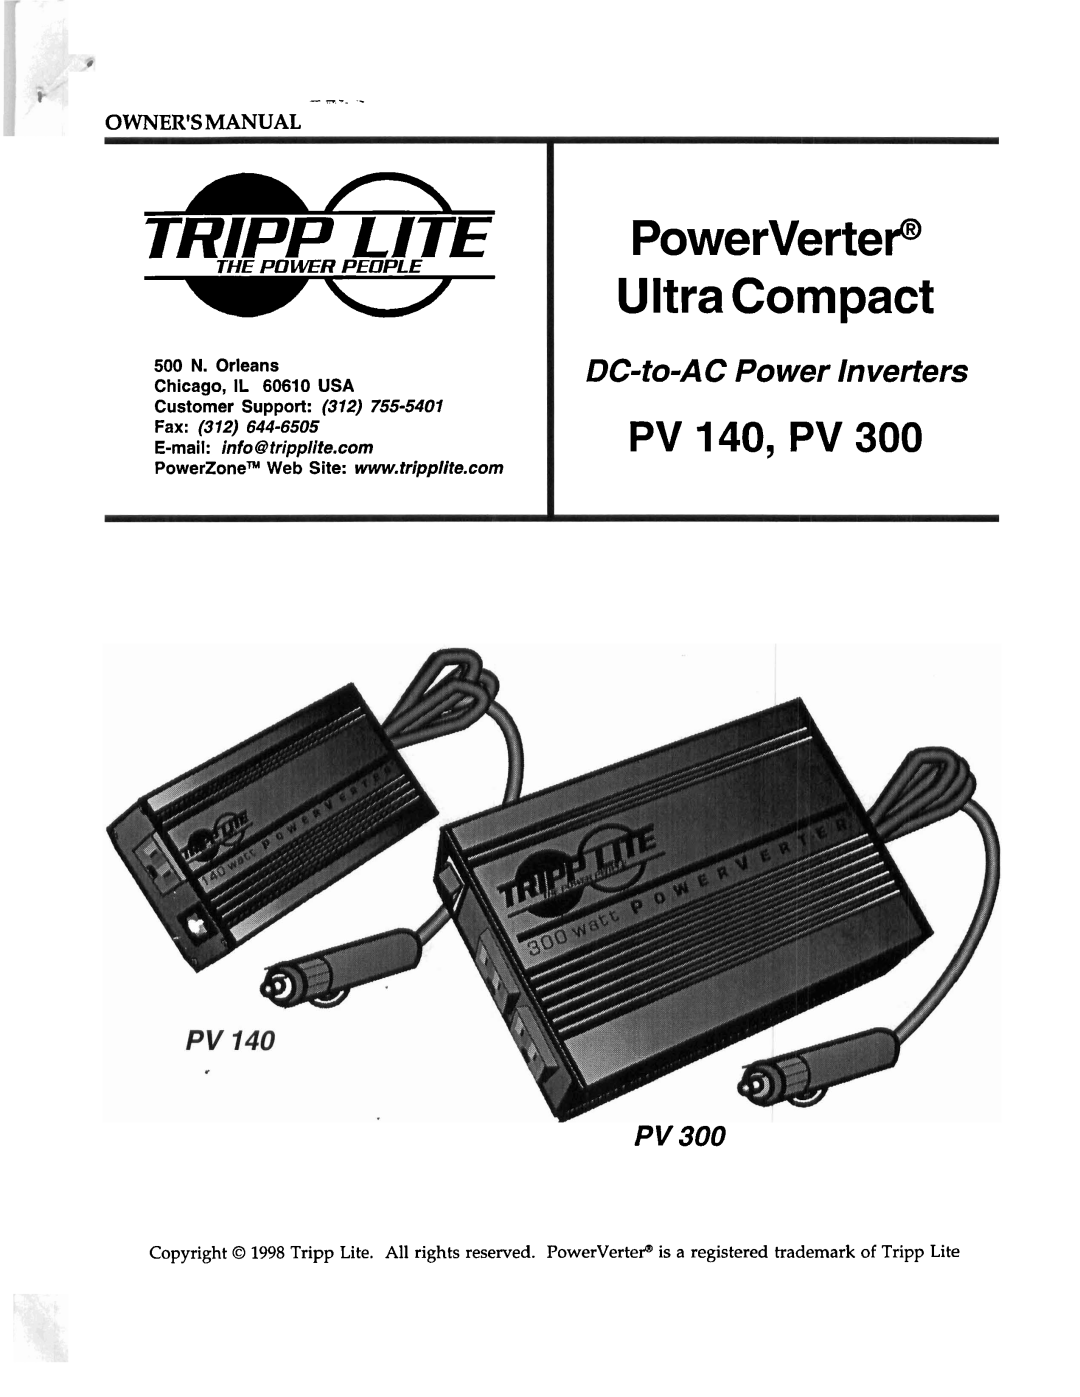 Tripp Lite PV 300 owner manual Ownersmanual, Tripp Lite, PowerVerteP UltraCompact, PV 140, PV, DC-to-AC Power Inverters 